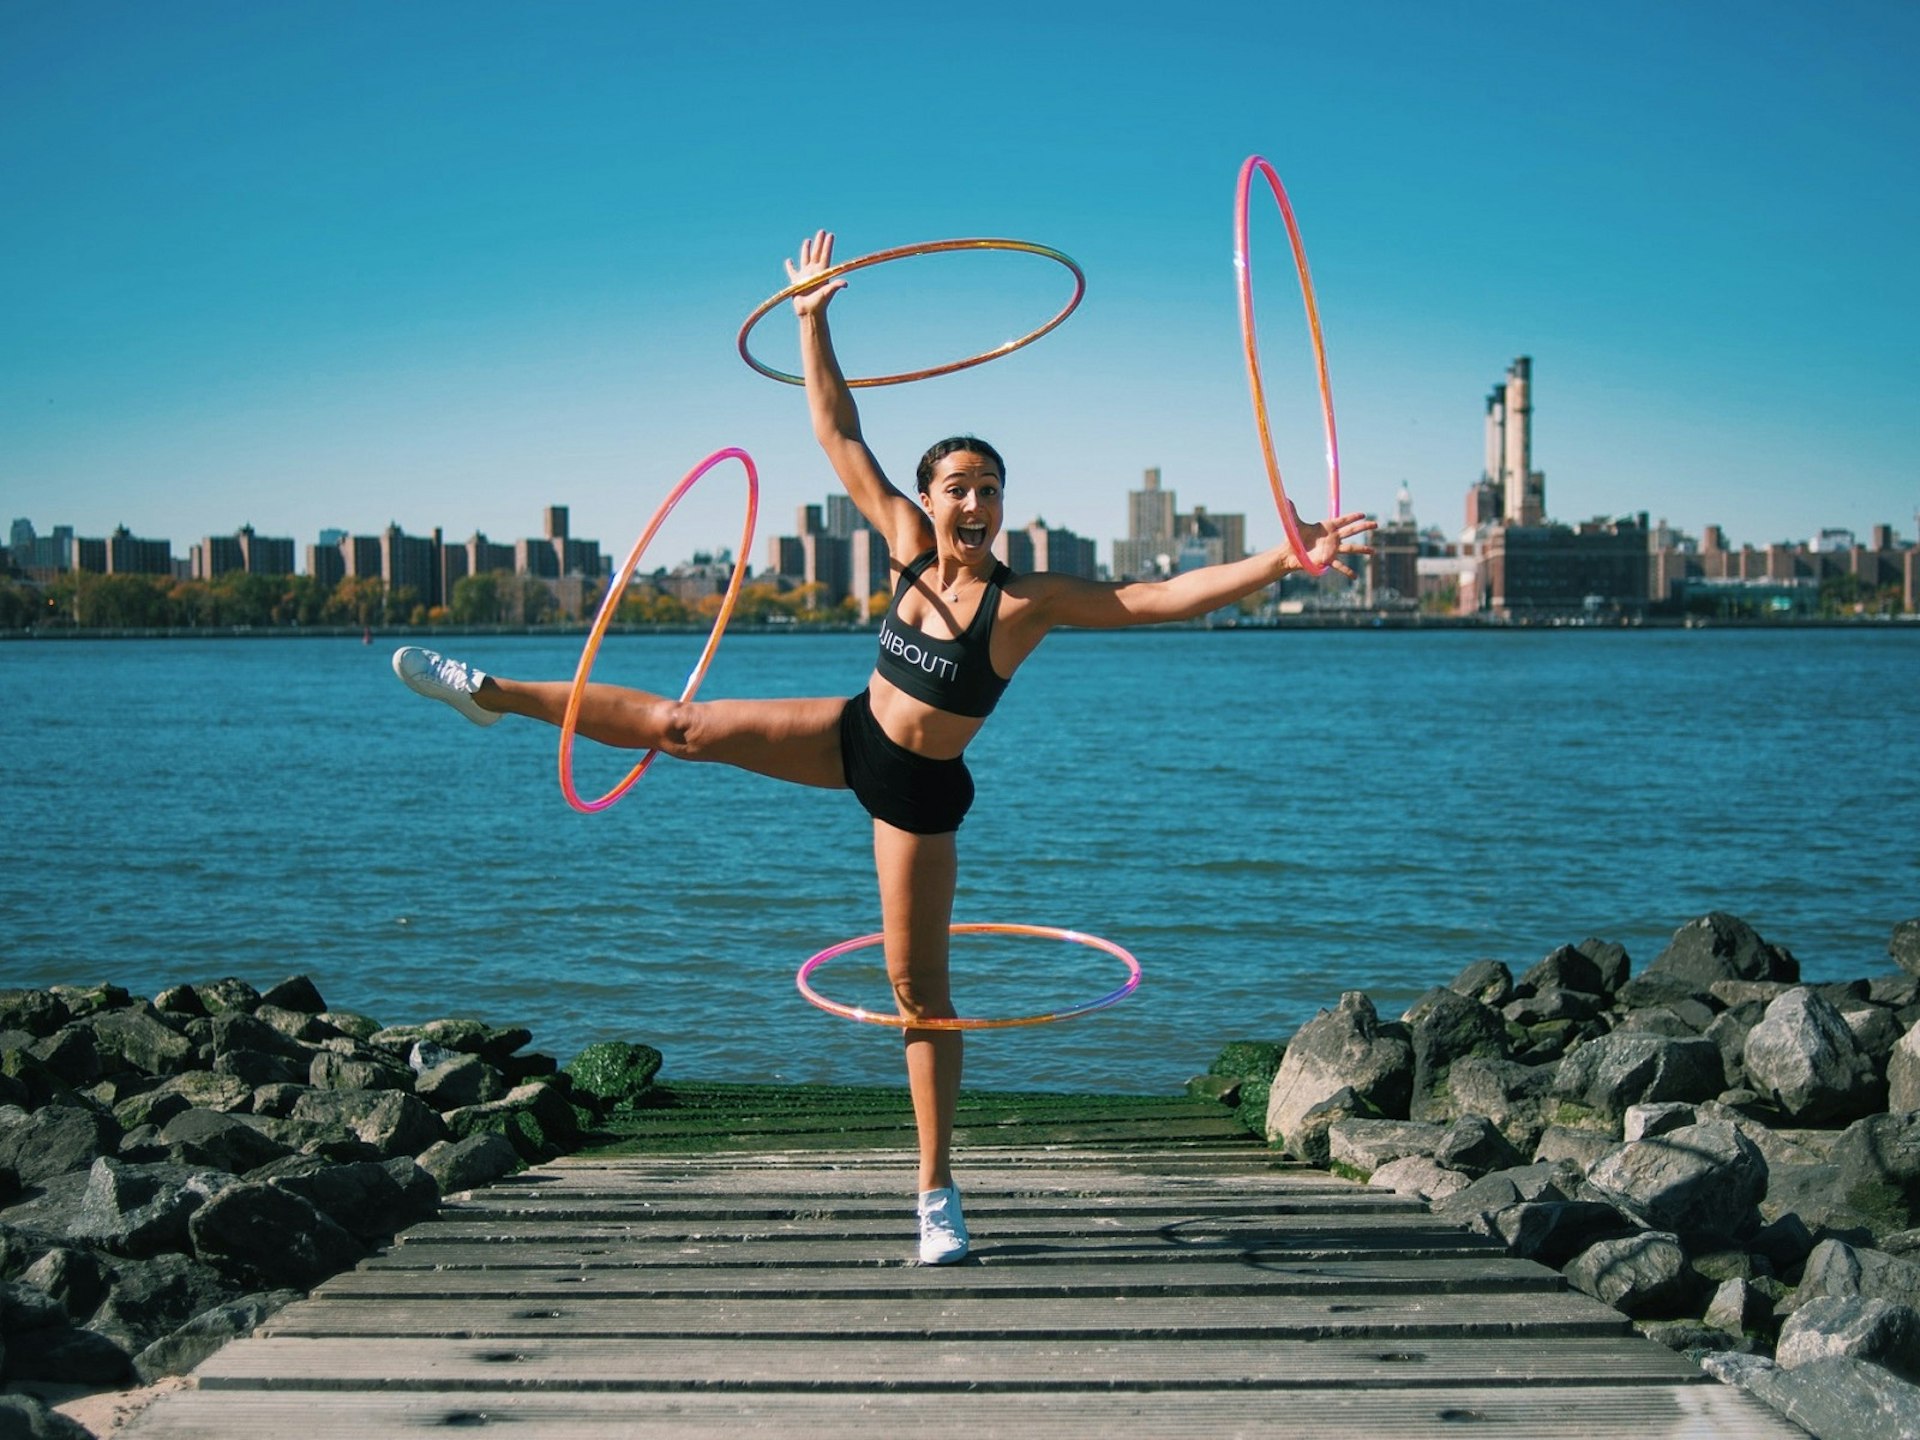 A woman with several hula hoops in motion on her arms, legs and body. She is smiling into the camera with water and a cityscape behind her.